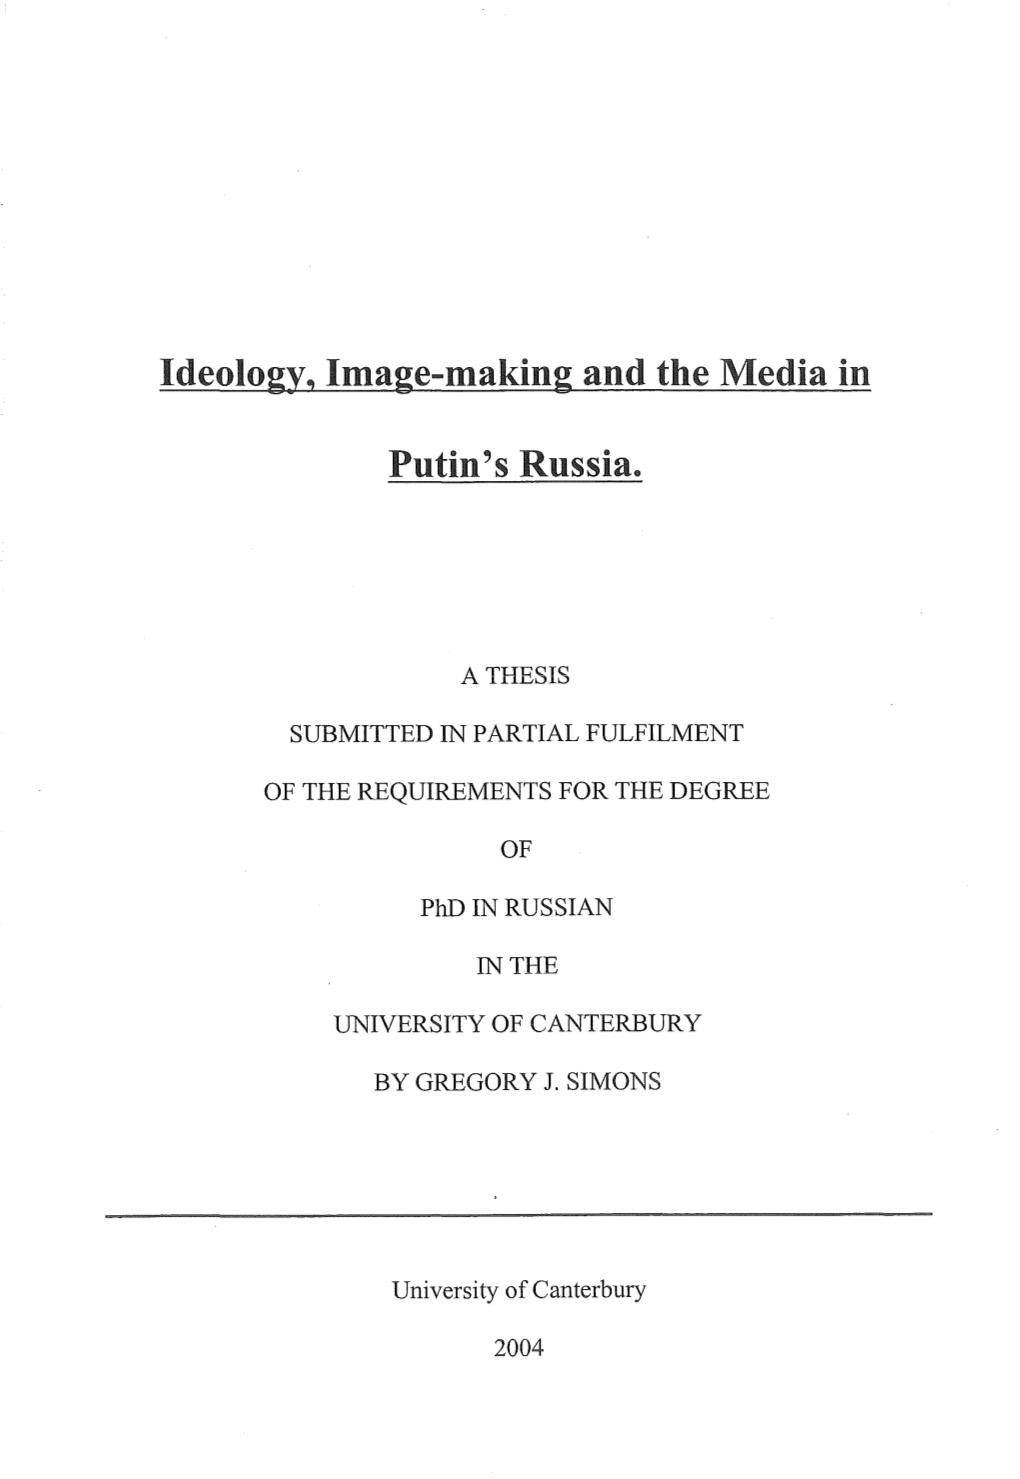 Ideology, Image-Making and the Media in Putin's Russia